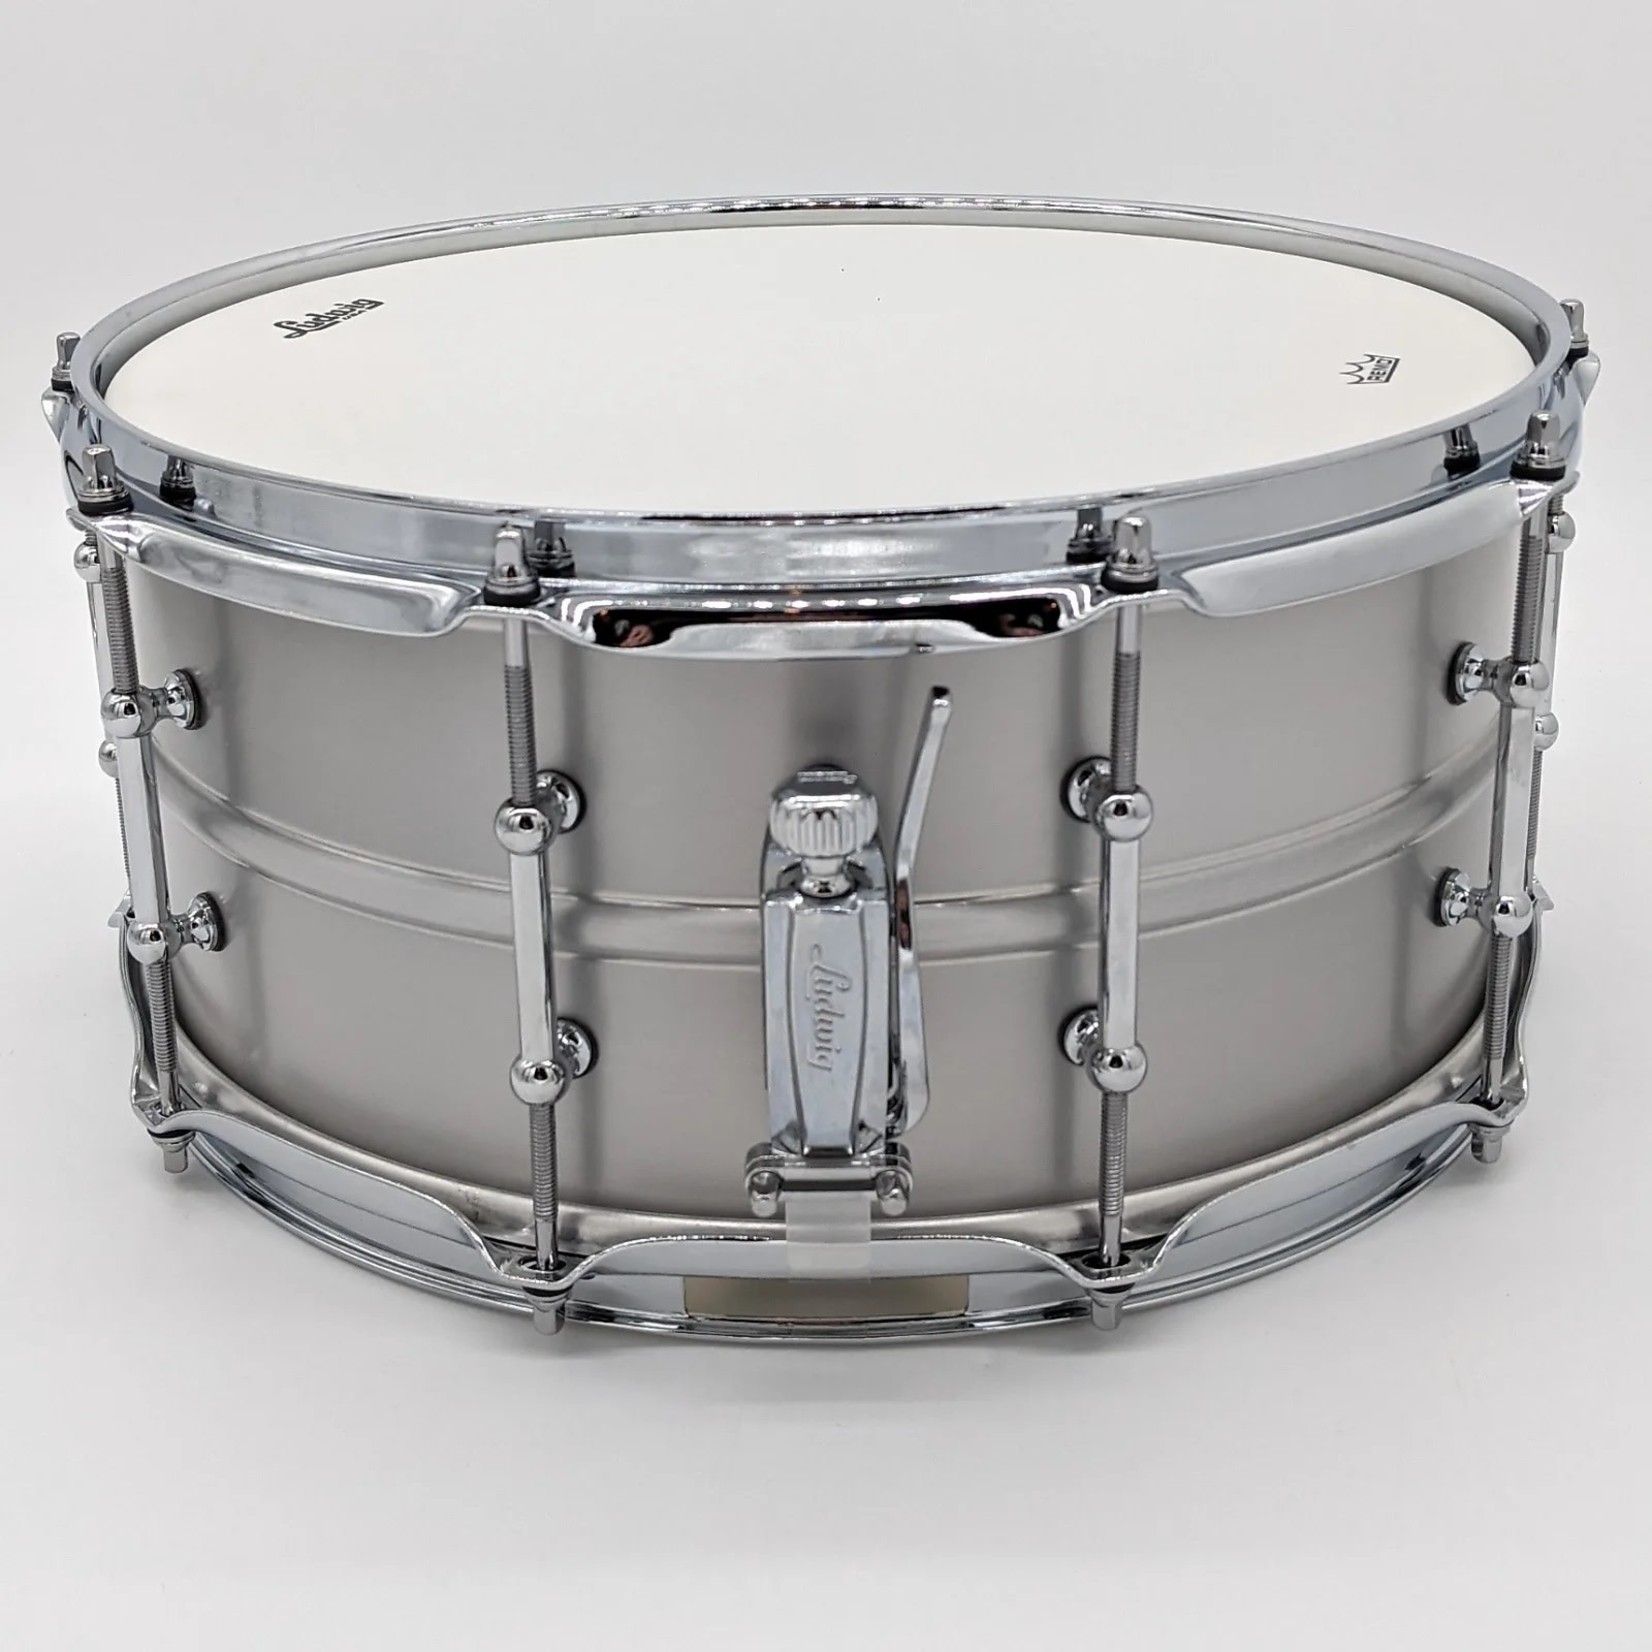 Ludwig Ludwig 6.5x14" Acrolite Snare Drum With Tube Lugs LM405CT